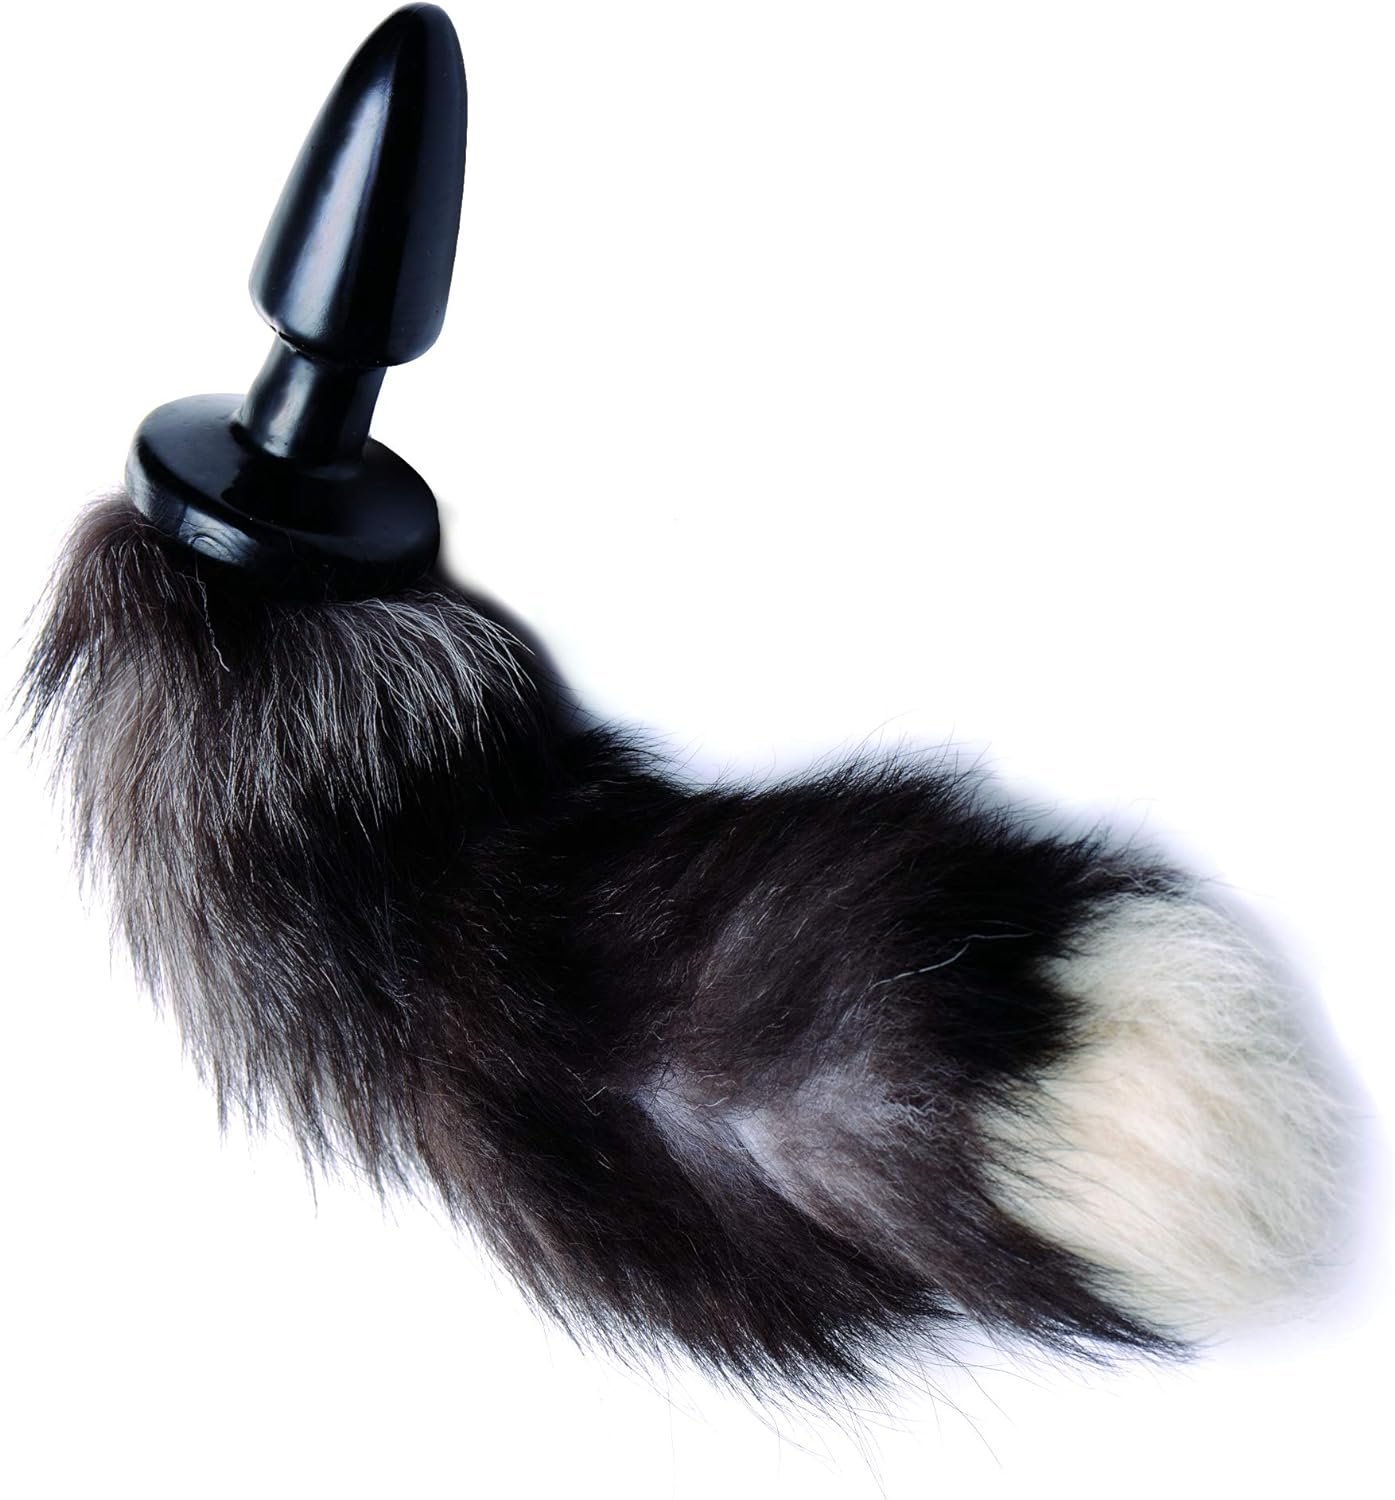 Buy Frisky Fox Tail Anal Plug In Pakistan at Rs. 11000 from Likeshop.pk